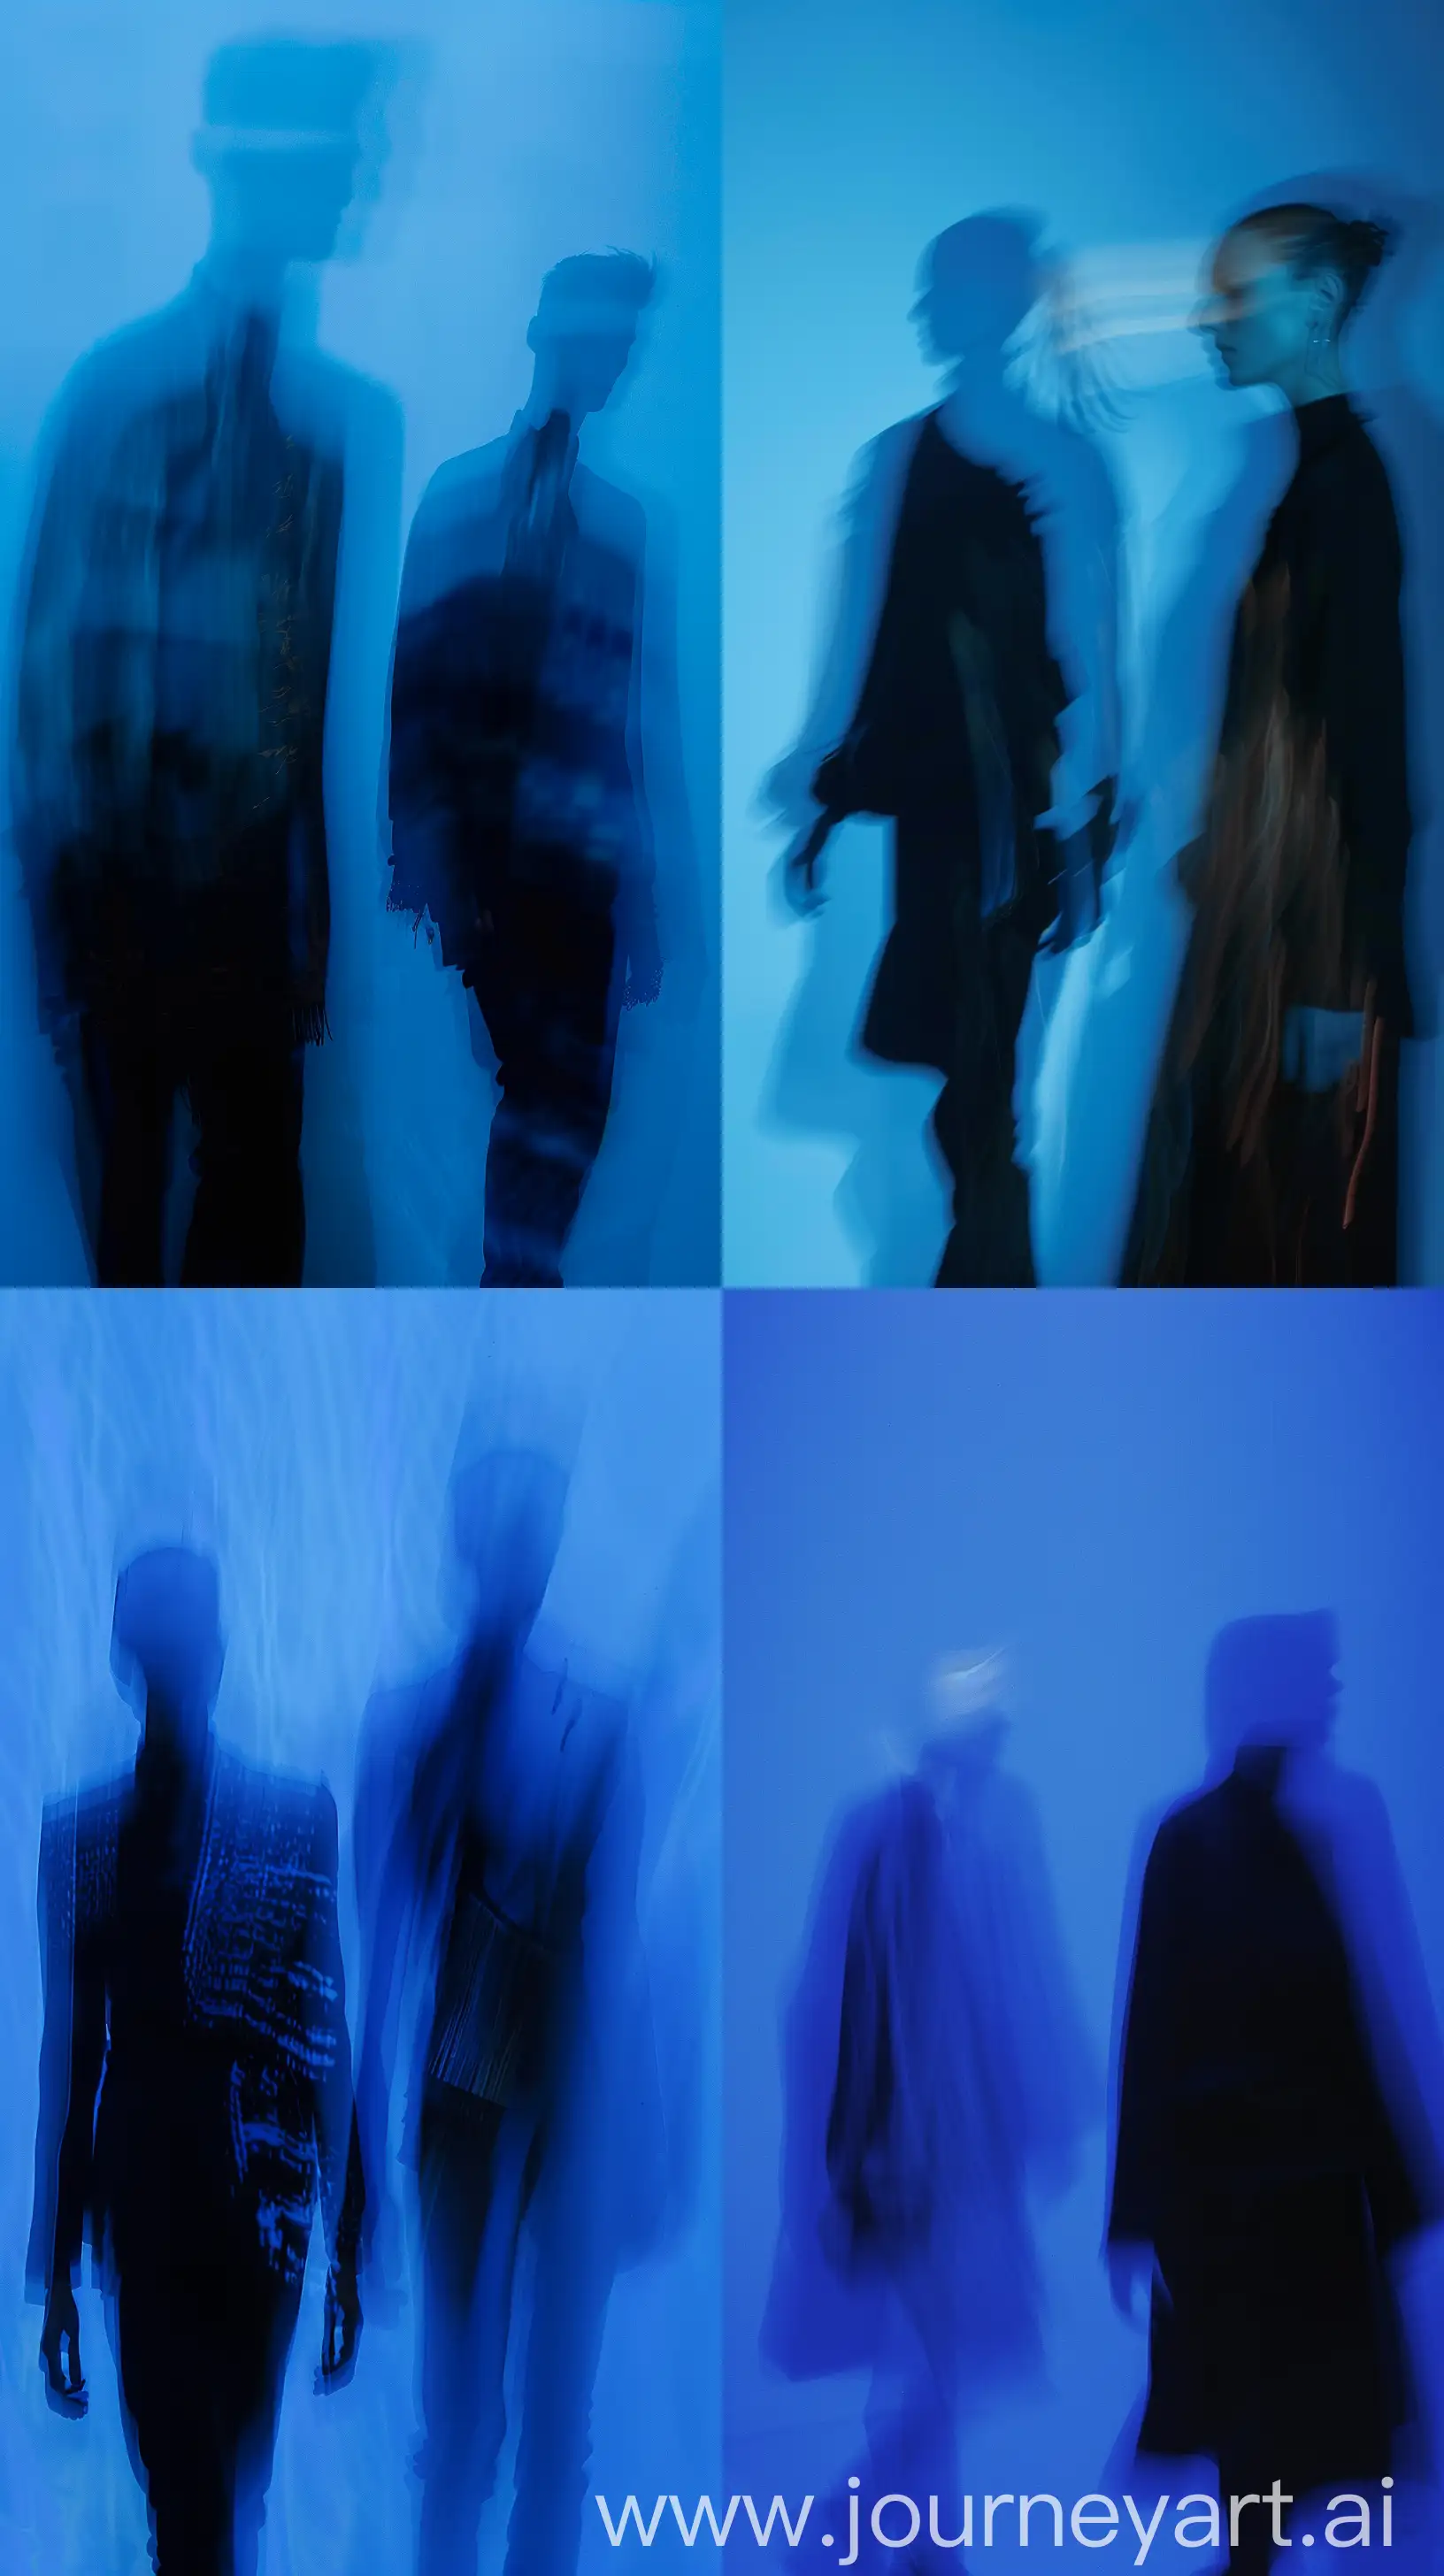 Create image image, two blurred balenciaga models figures are depicted against a blue background. The motion blur creates a ghostly, ethereal effect, with clothing details obscured. One figure in the foreground appears to be wearing a horror high fashion blackout, contrasting with the second figure, which is in a darker outfit. The lighting and blur lend a mysterious, almost haunting quality to the scene. Many acid colors  --ar 9:16